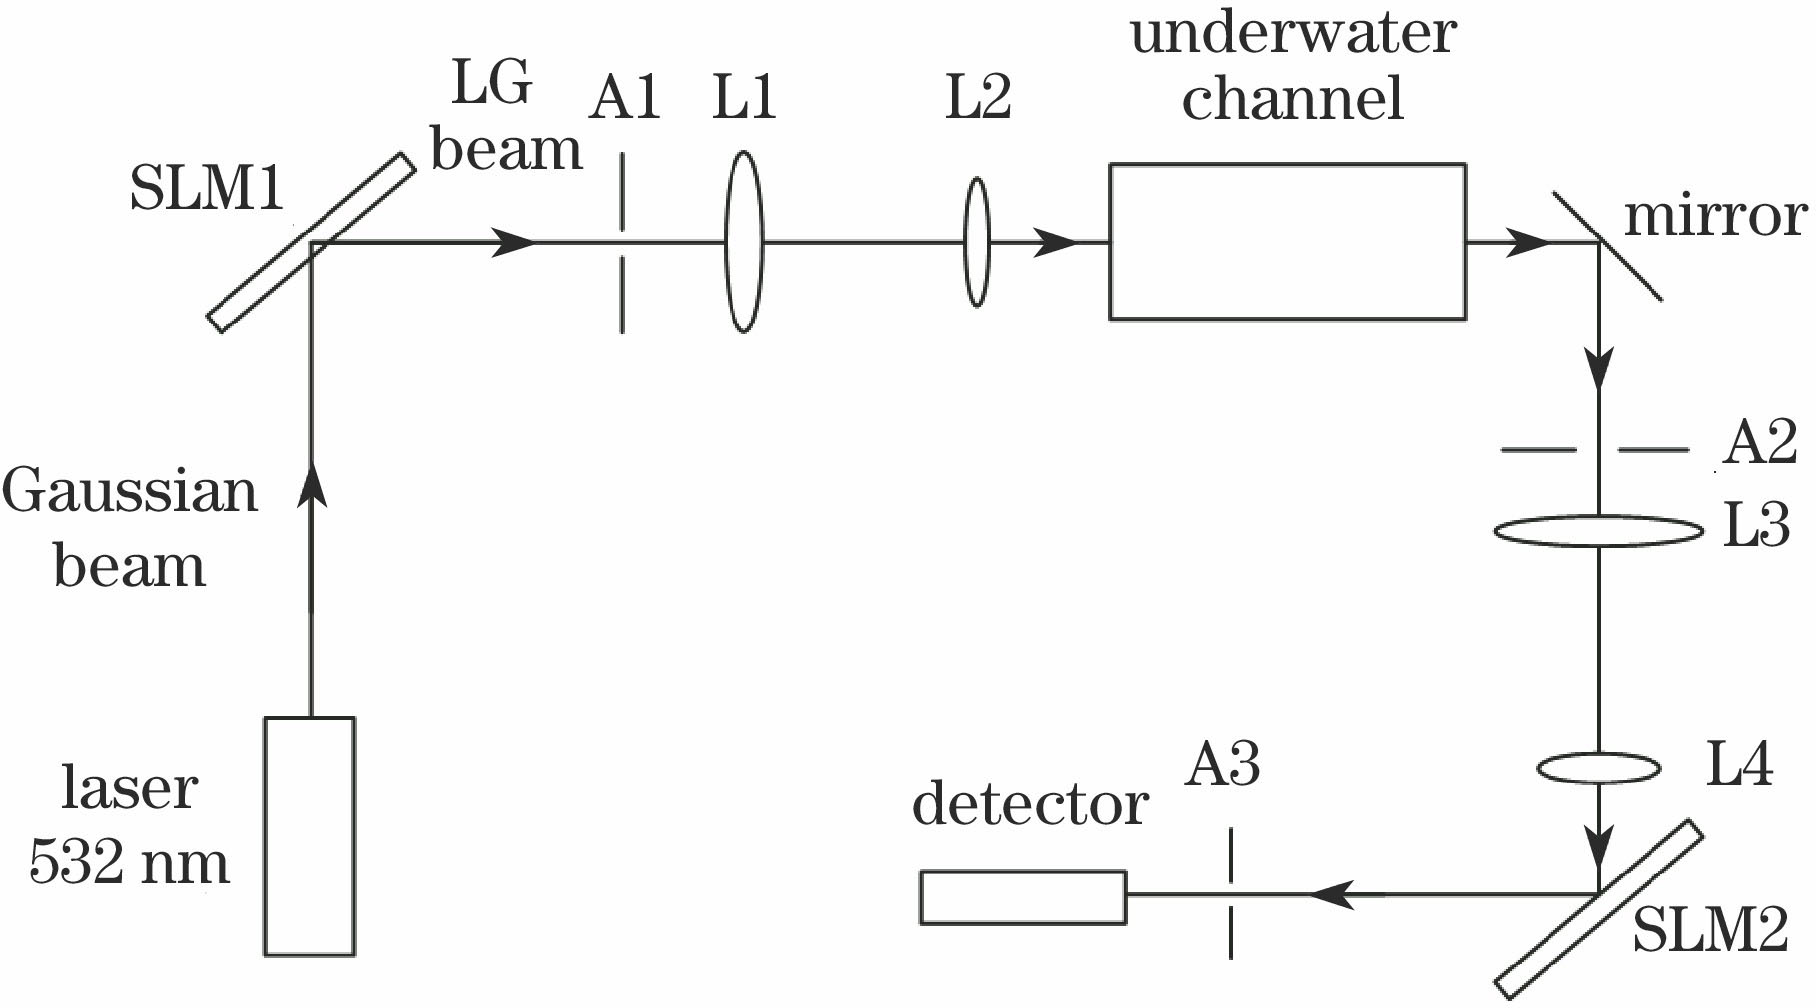 Experimental schematic of an underwater communication system using OAM state